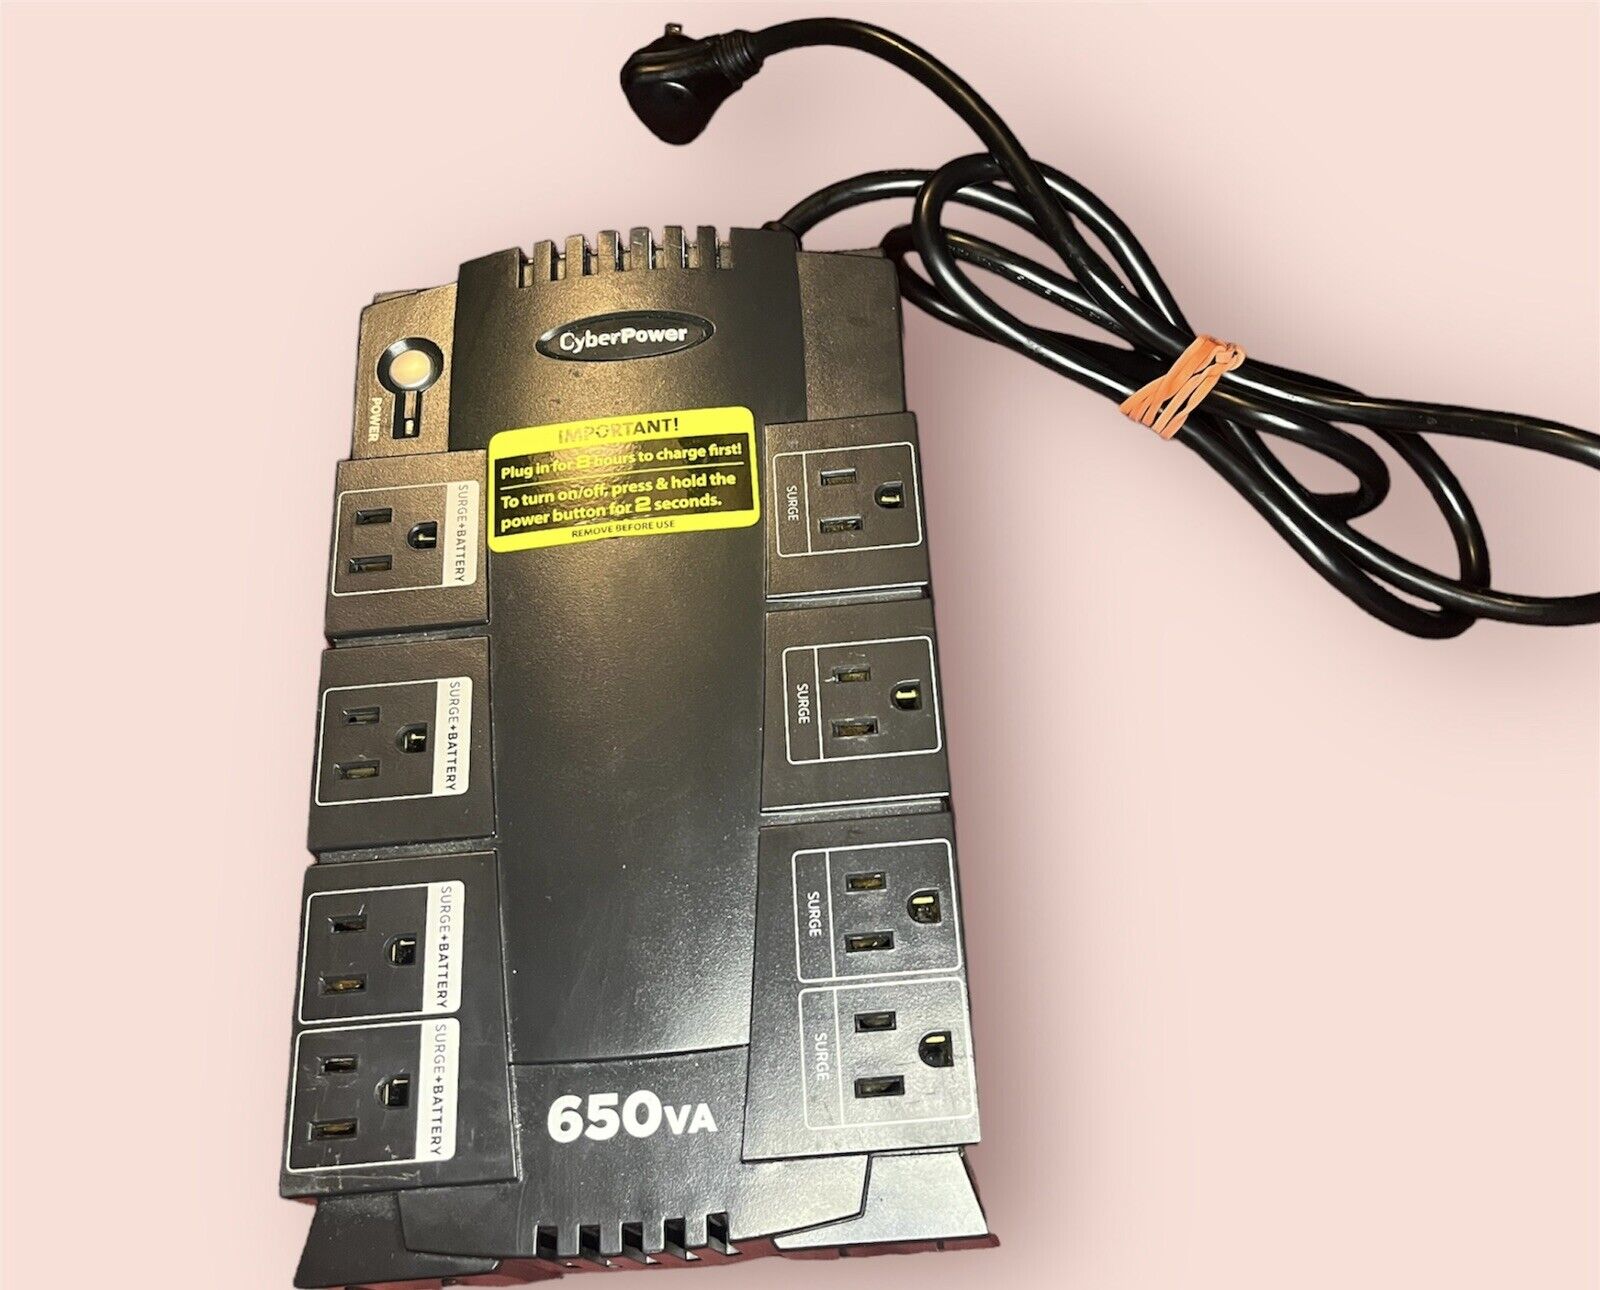 8 Outlet CYBERPOWER 650 VA BATTERY BACKUP SURGE PROTECTOR.